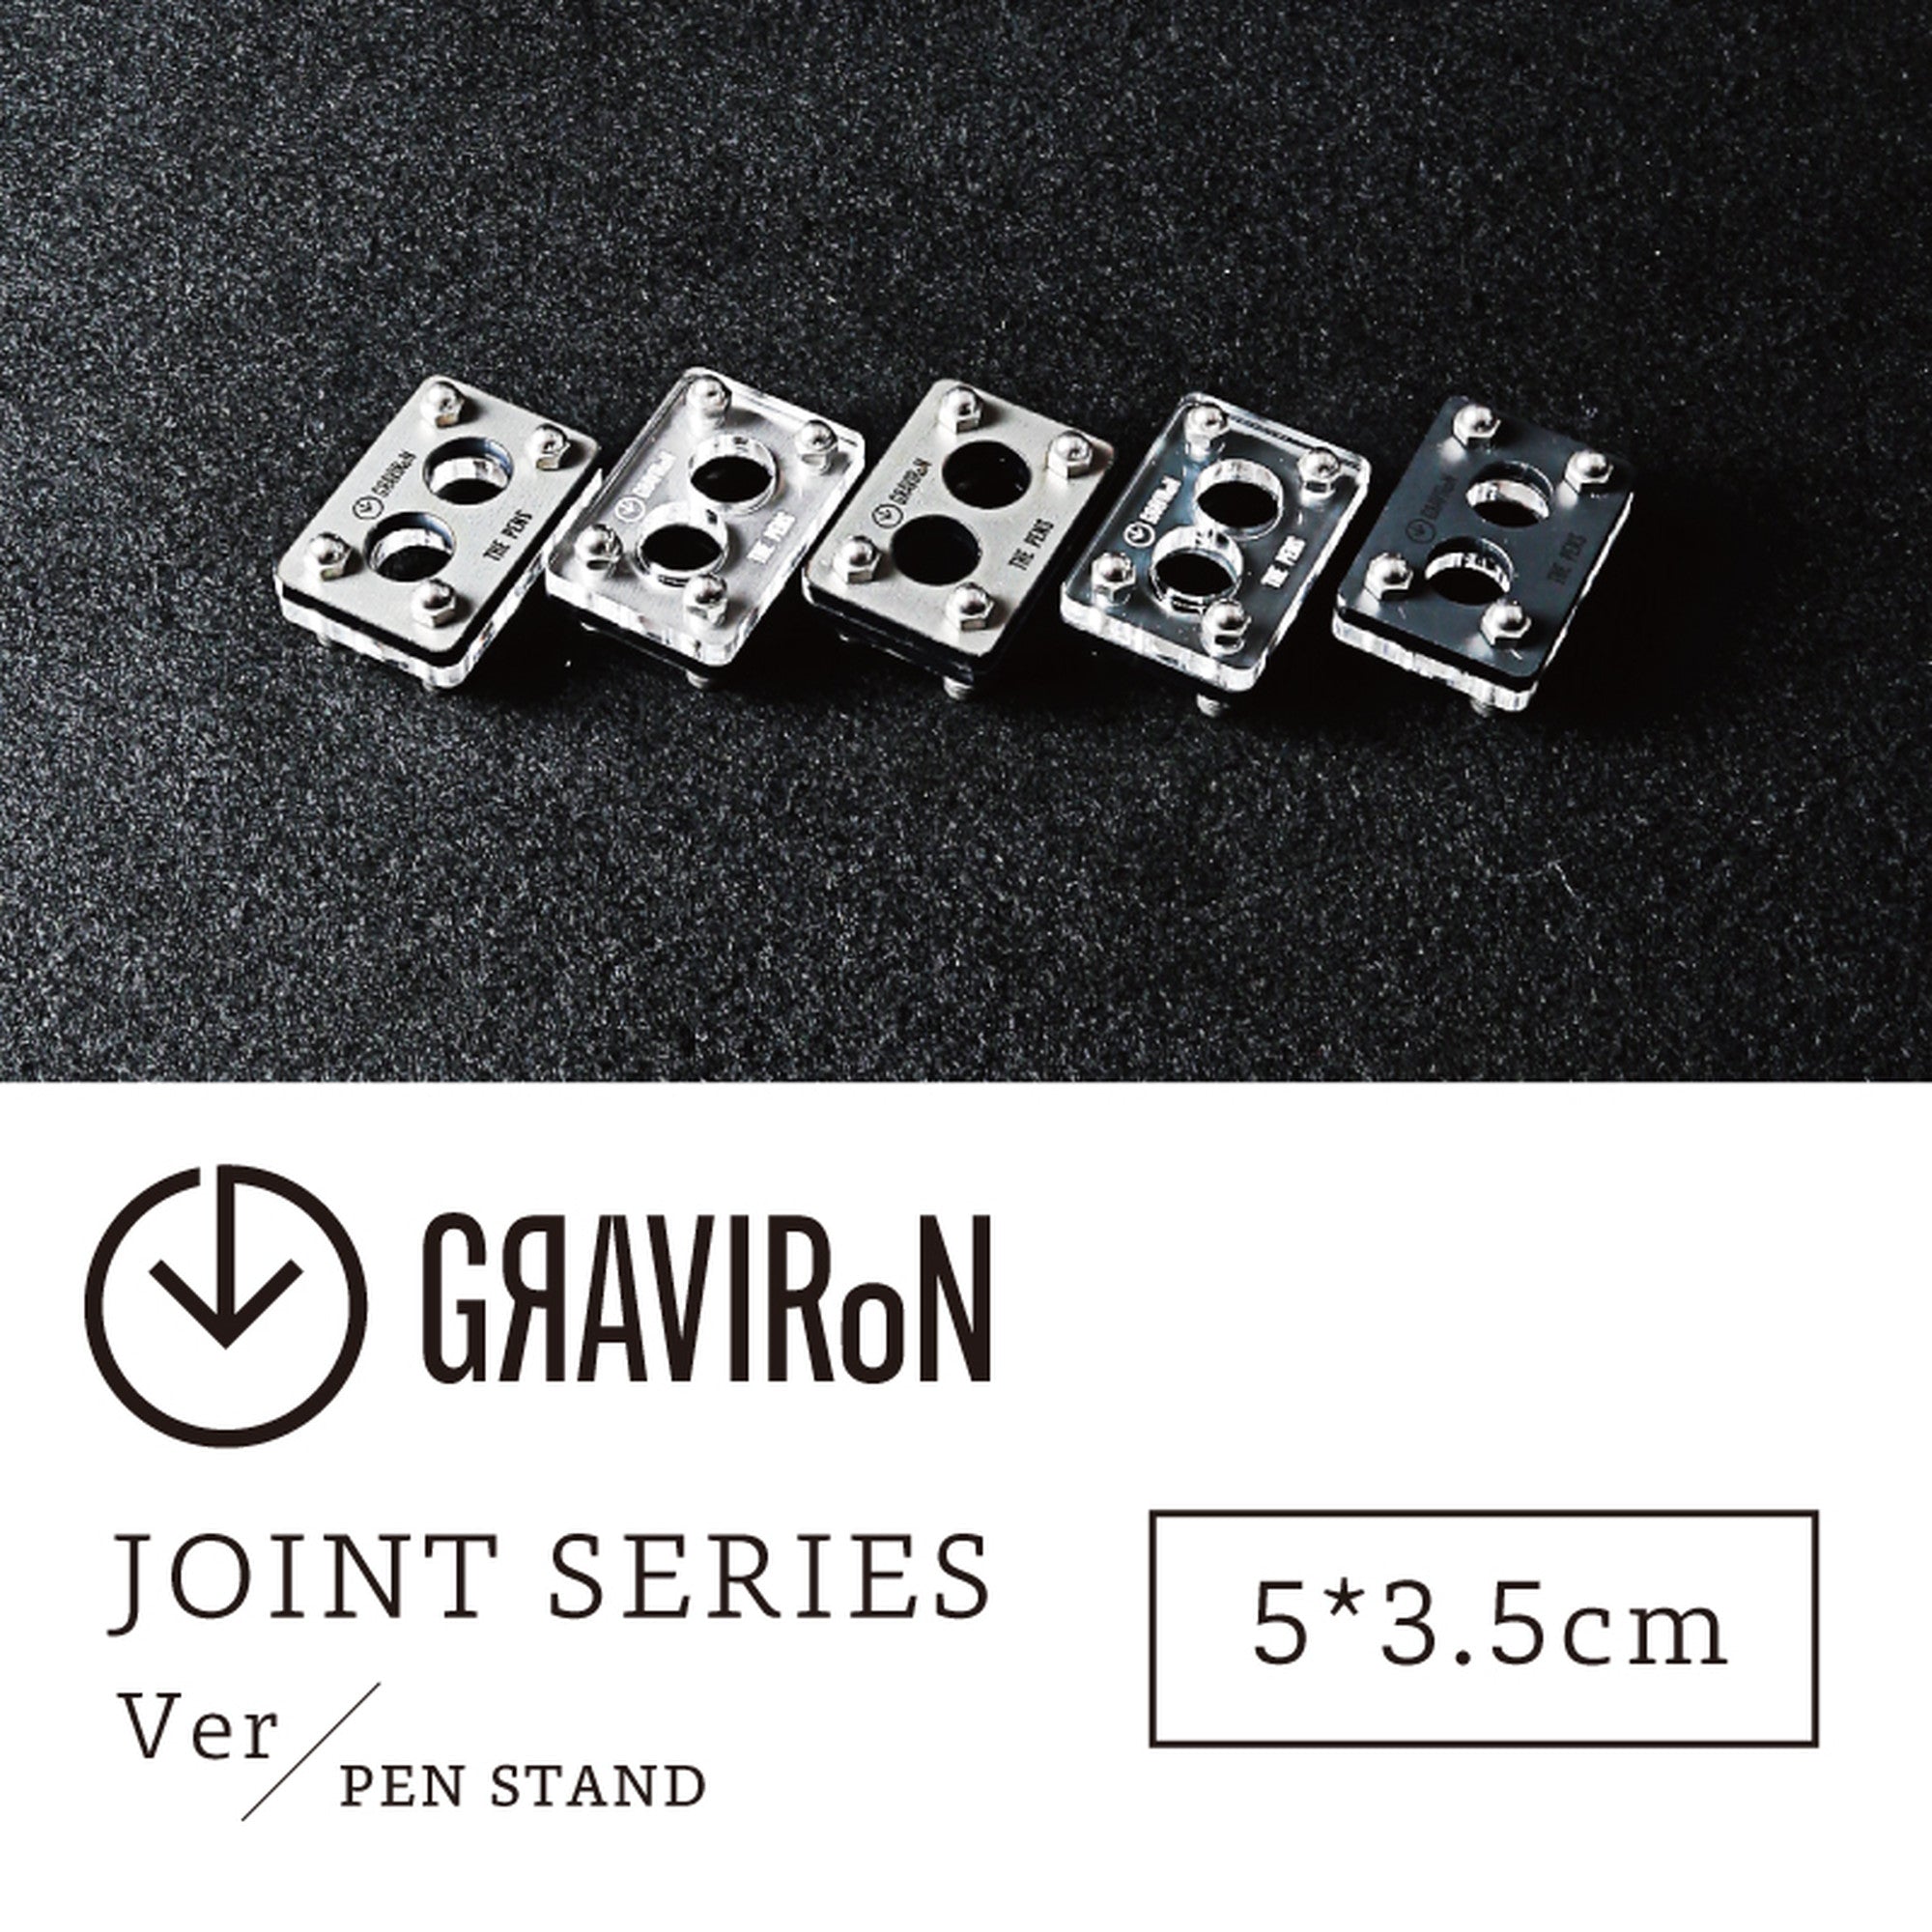 Joint Series PEN STAND　BOTTOM：酸洗鉄、TOP：アクリル